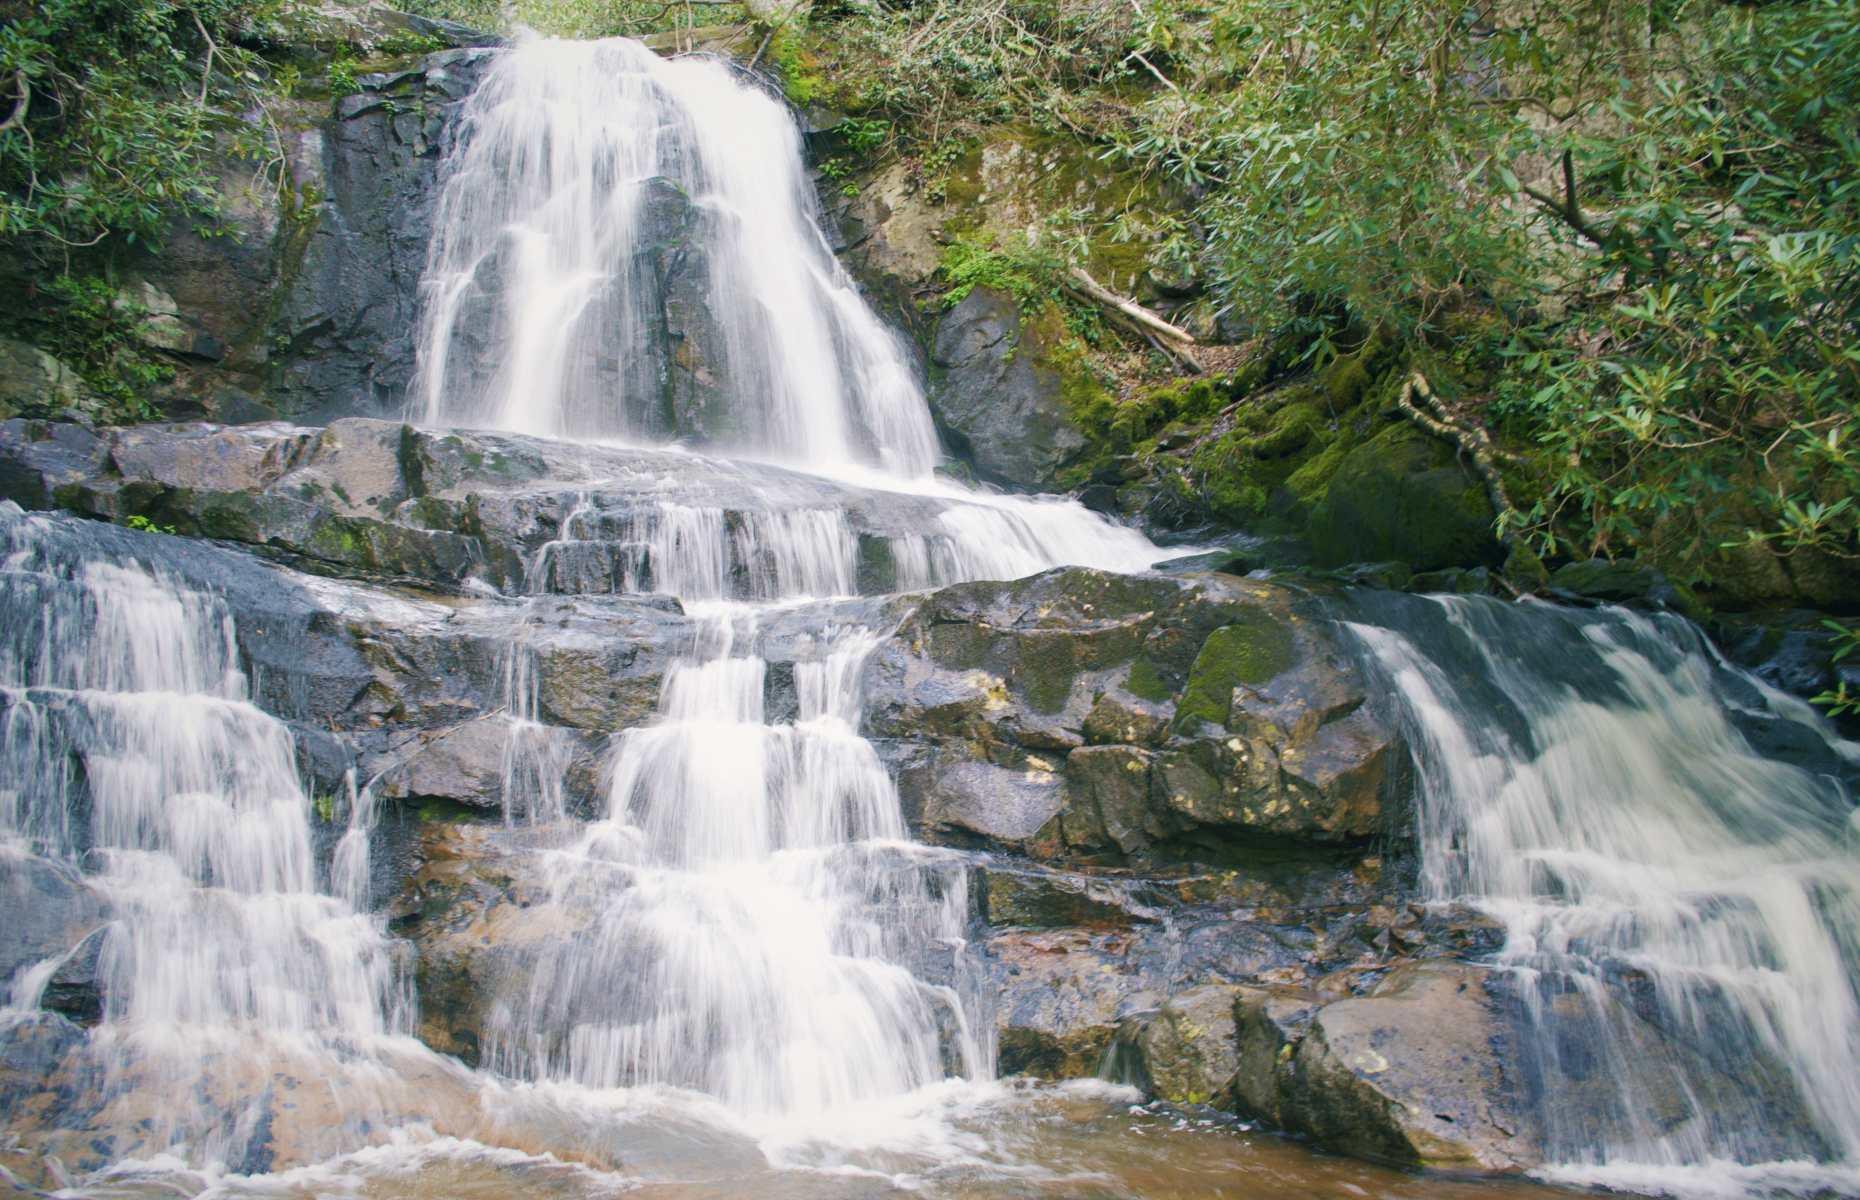 <p>You’re never far from a waterfall in the Great Smokies. The tallest in the park is Ramsey Cascades, accessible via an eight-mile hike, though there are others far easier to reach – and still impressive in their own right. Two-tiered Laurel Falls (pictured) is just over a two-and-a-half-mile round-trip on mostly asphalt paths, making it the perfect excursion for young families. The Smoky Mountains’ most voluminous cascade is Abrams Falls, which is small (20ft high) but mighty.</p>